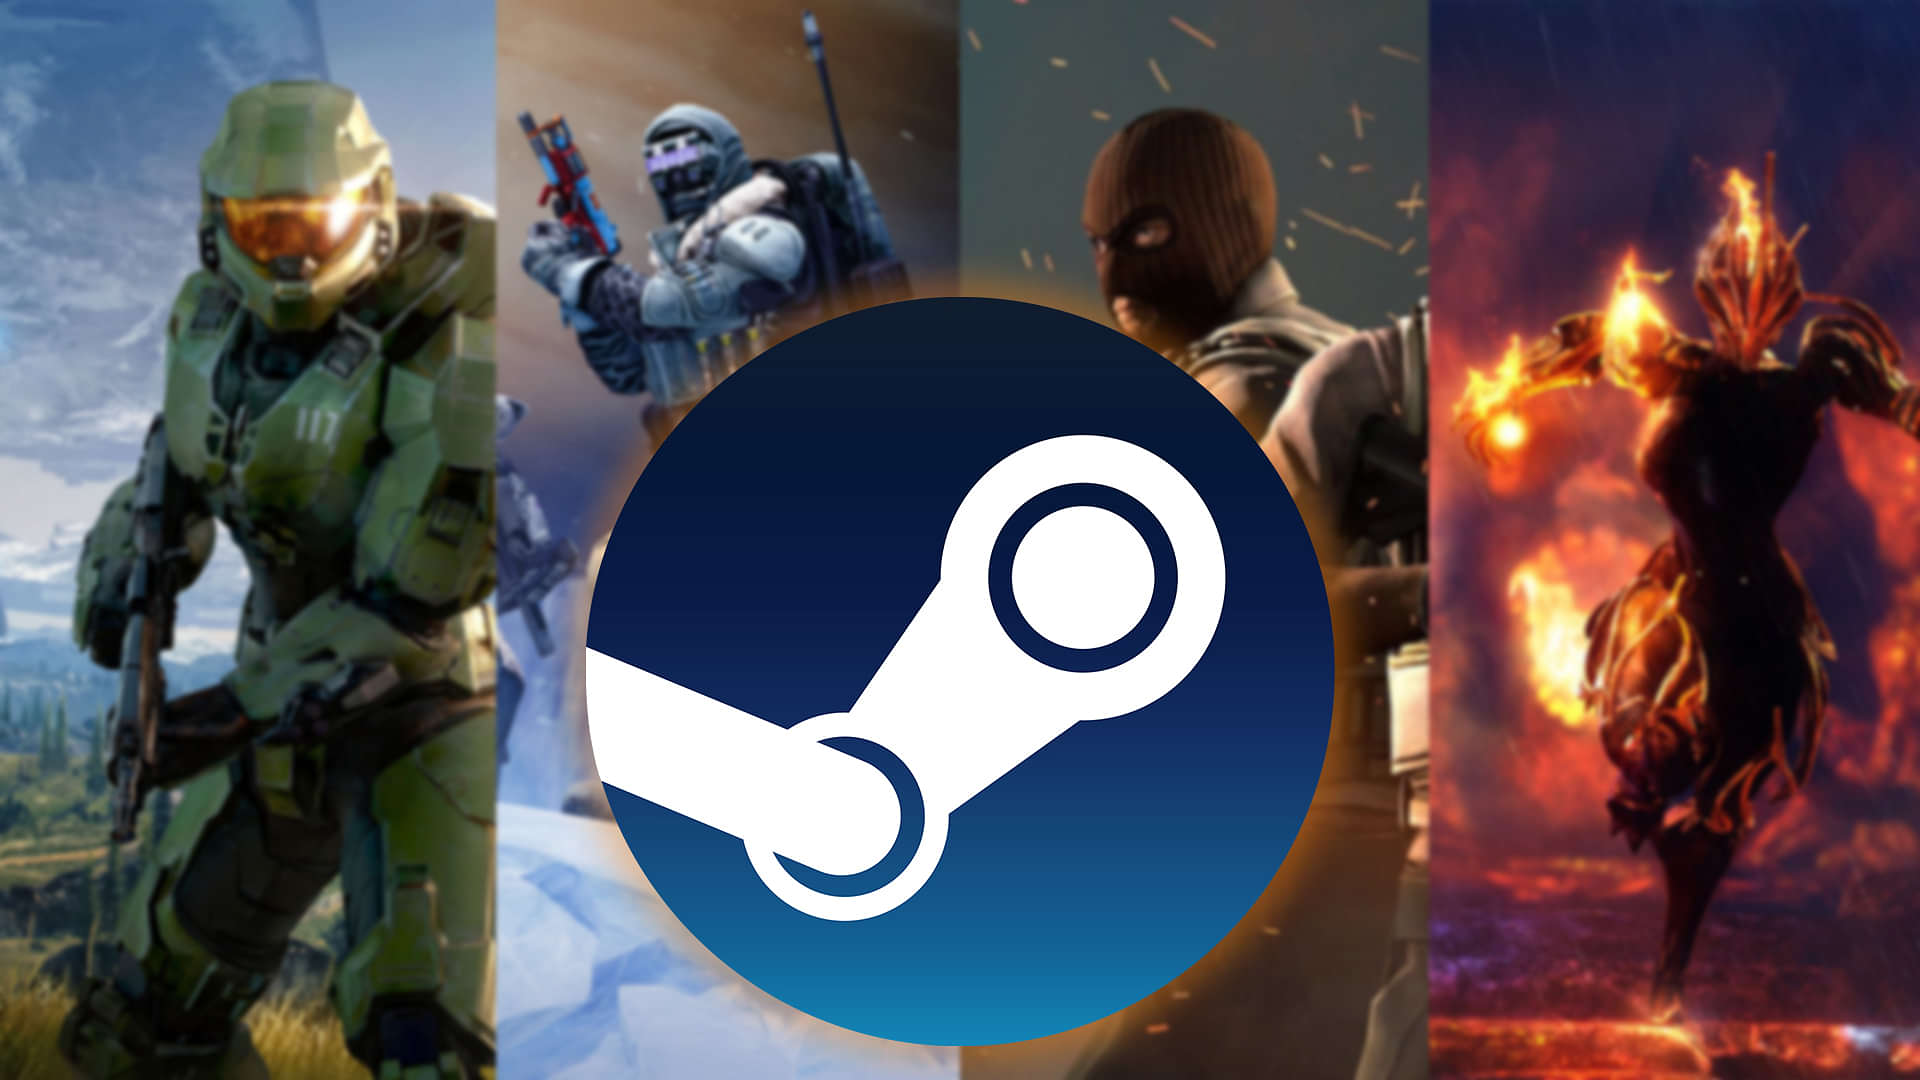 20 free games on Steam you should play in 2023 - The SportsRush